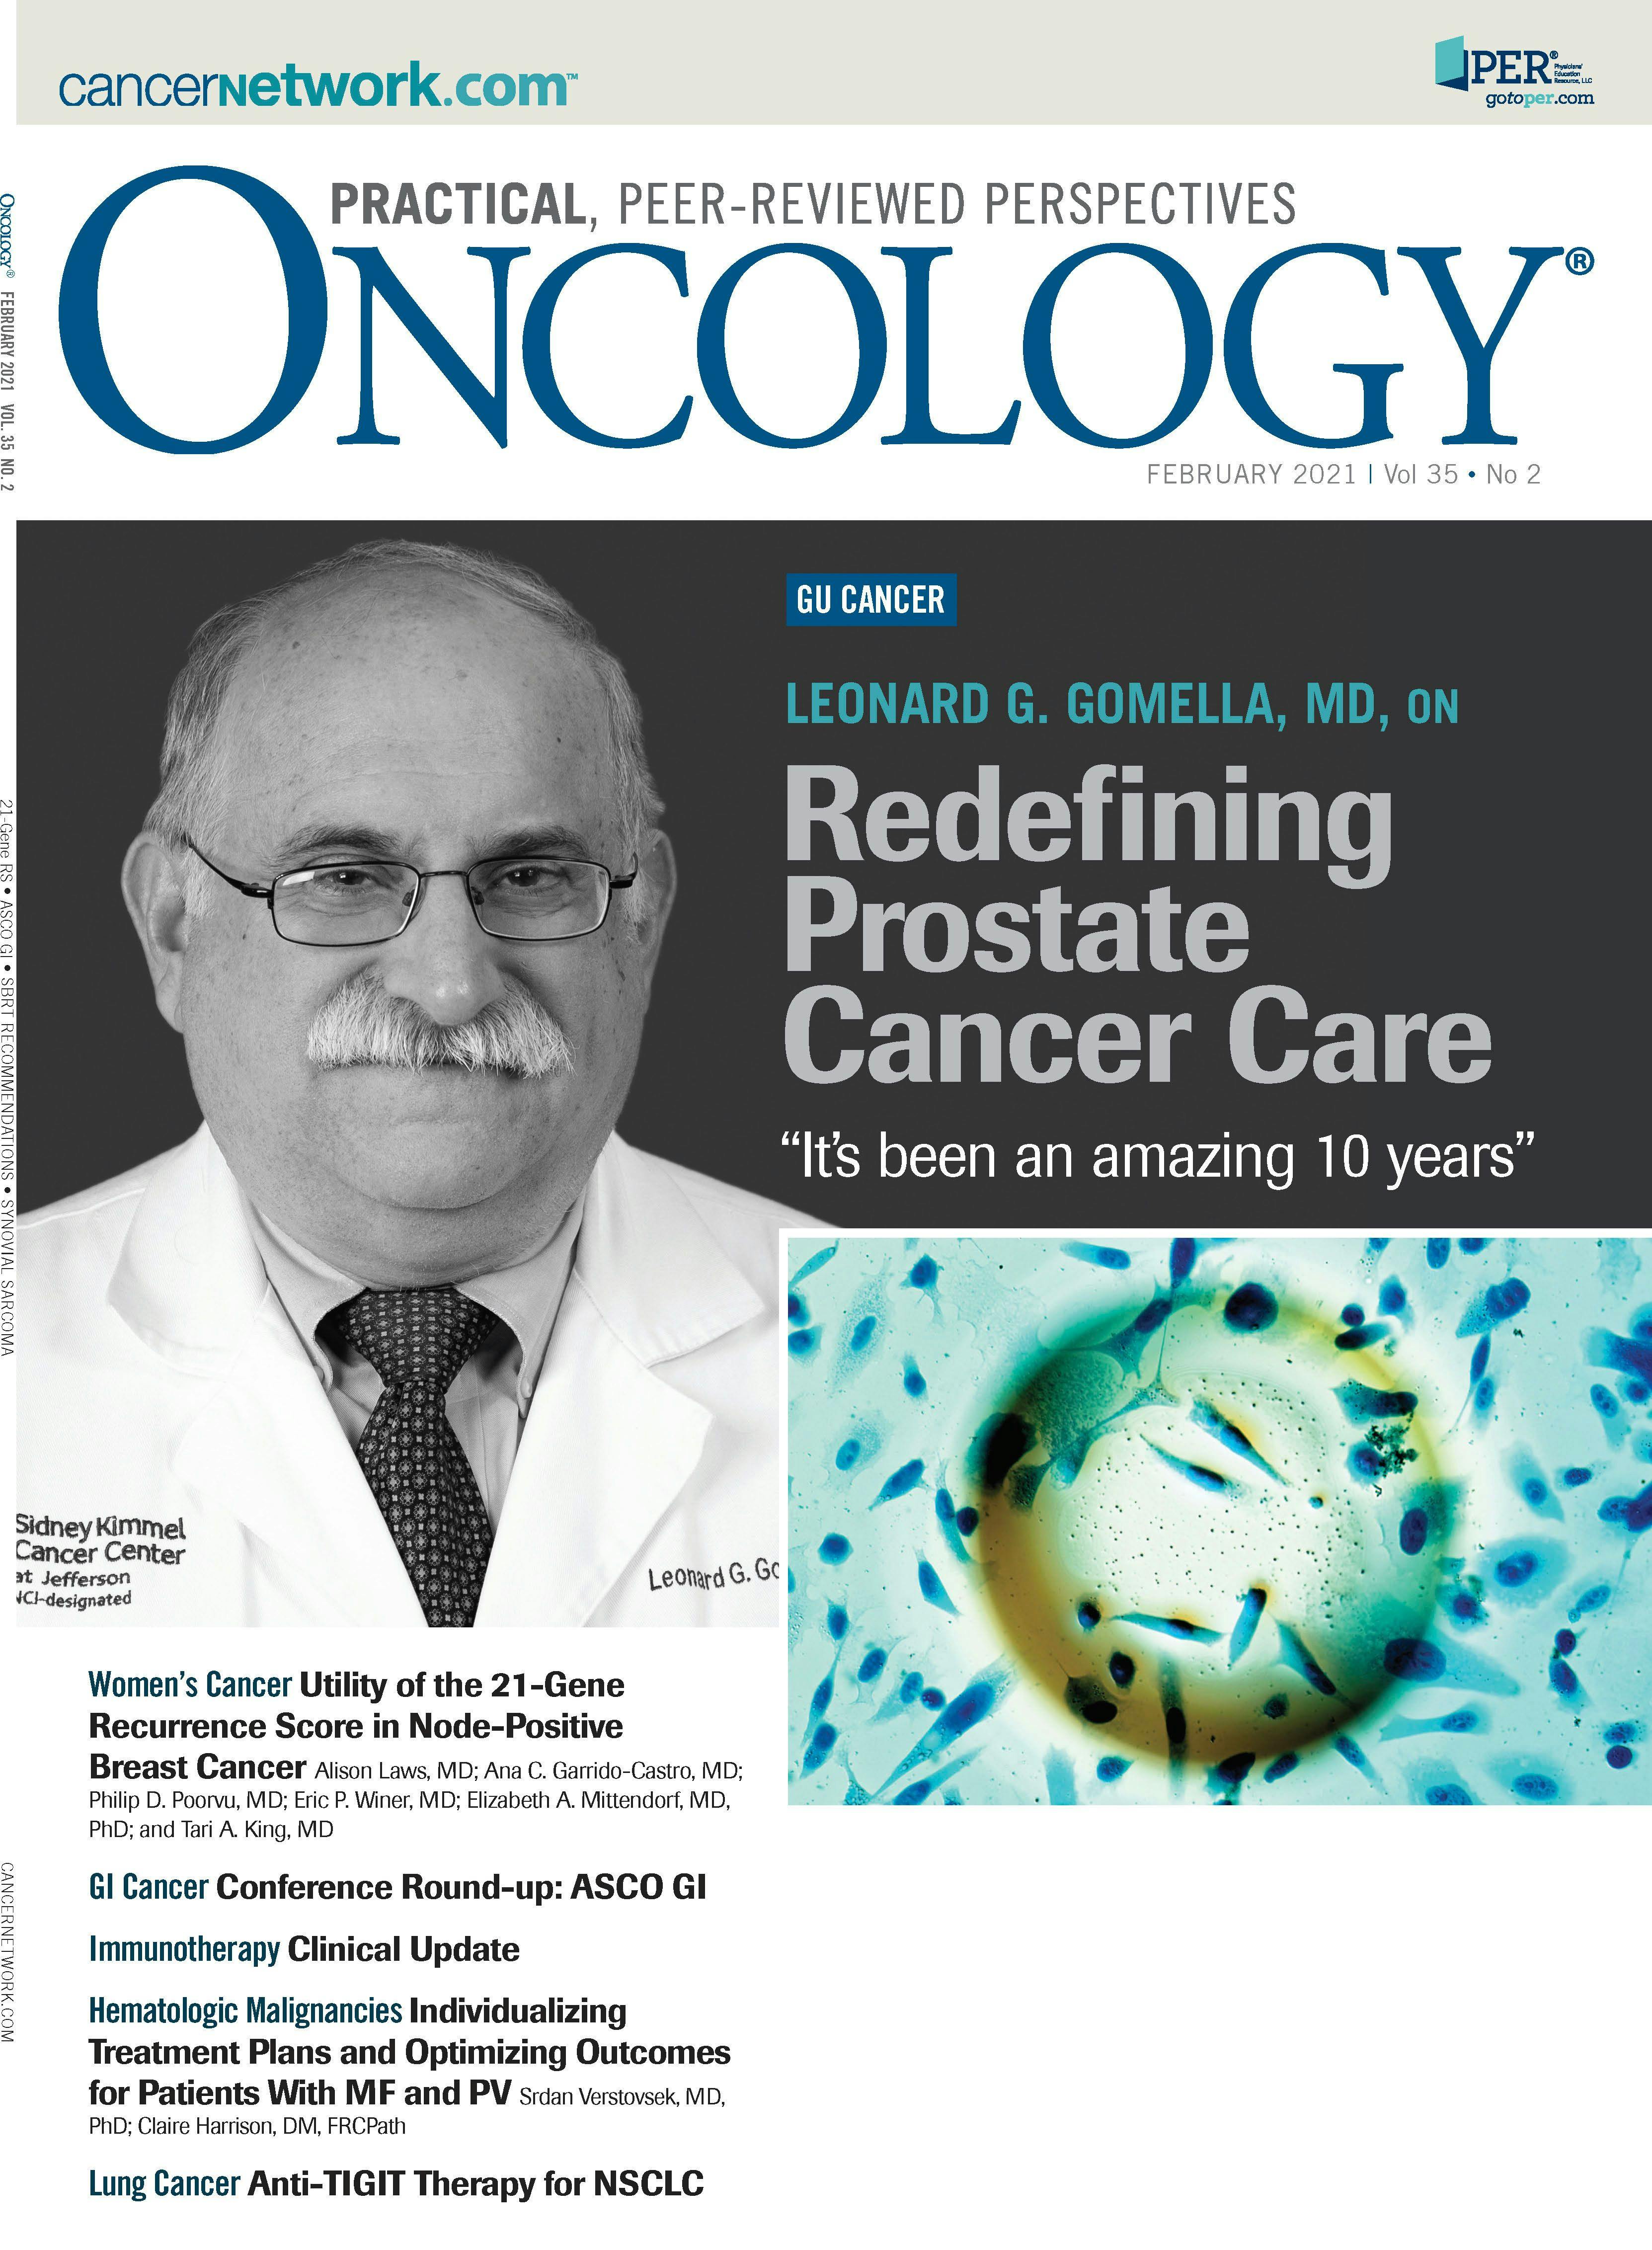 ONCOLOGY Vol 35 Issue 2